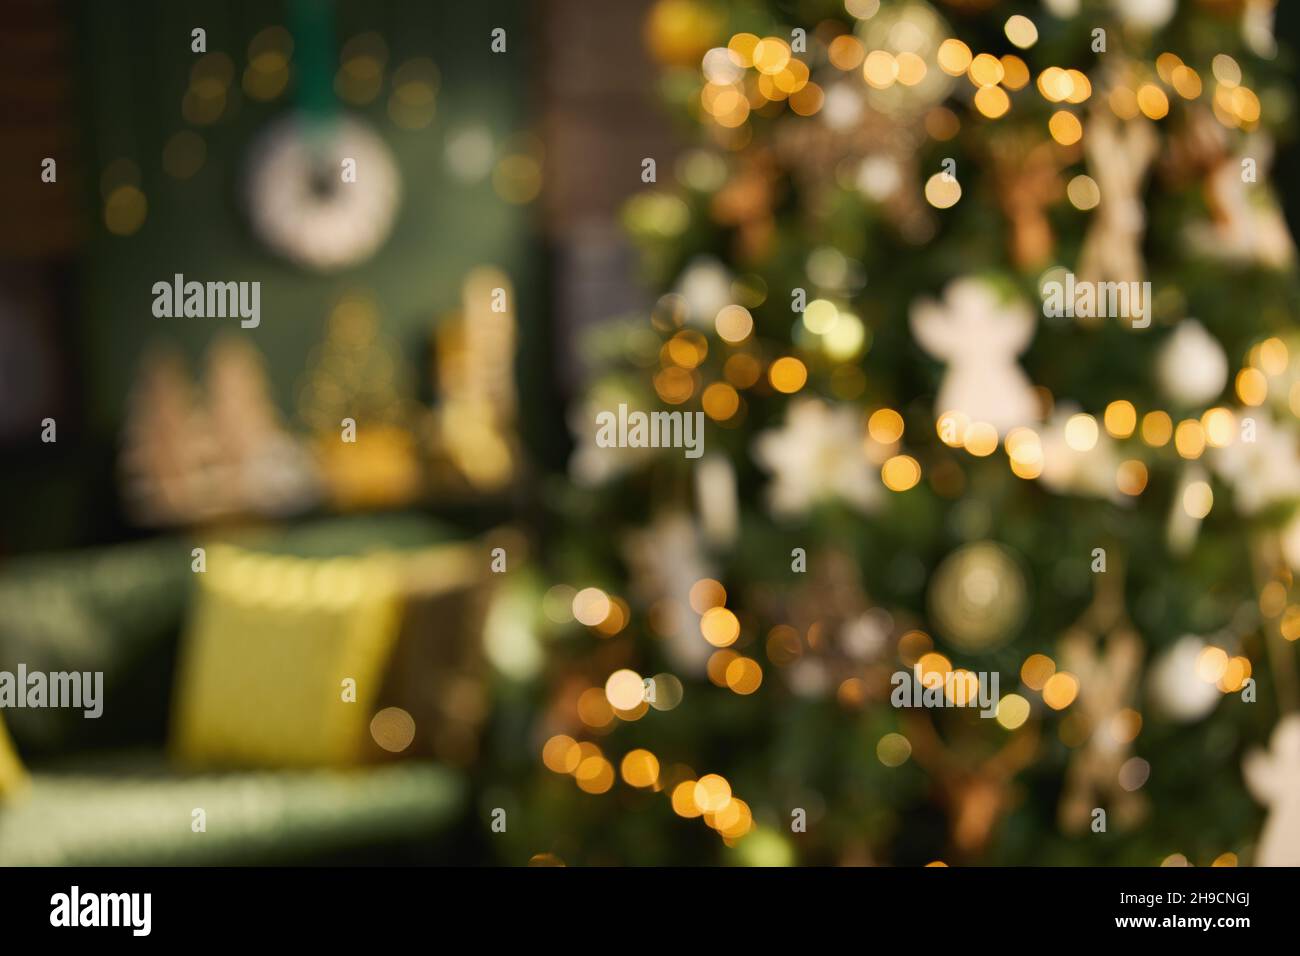 blurred Christmas decorated green modern house with big Christmas tree. Stock Photo